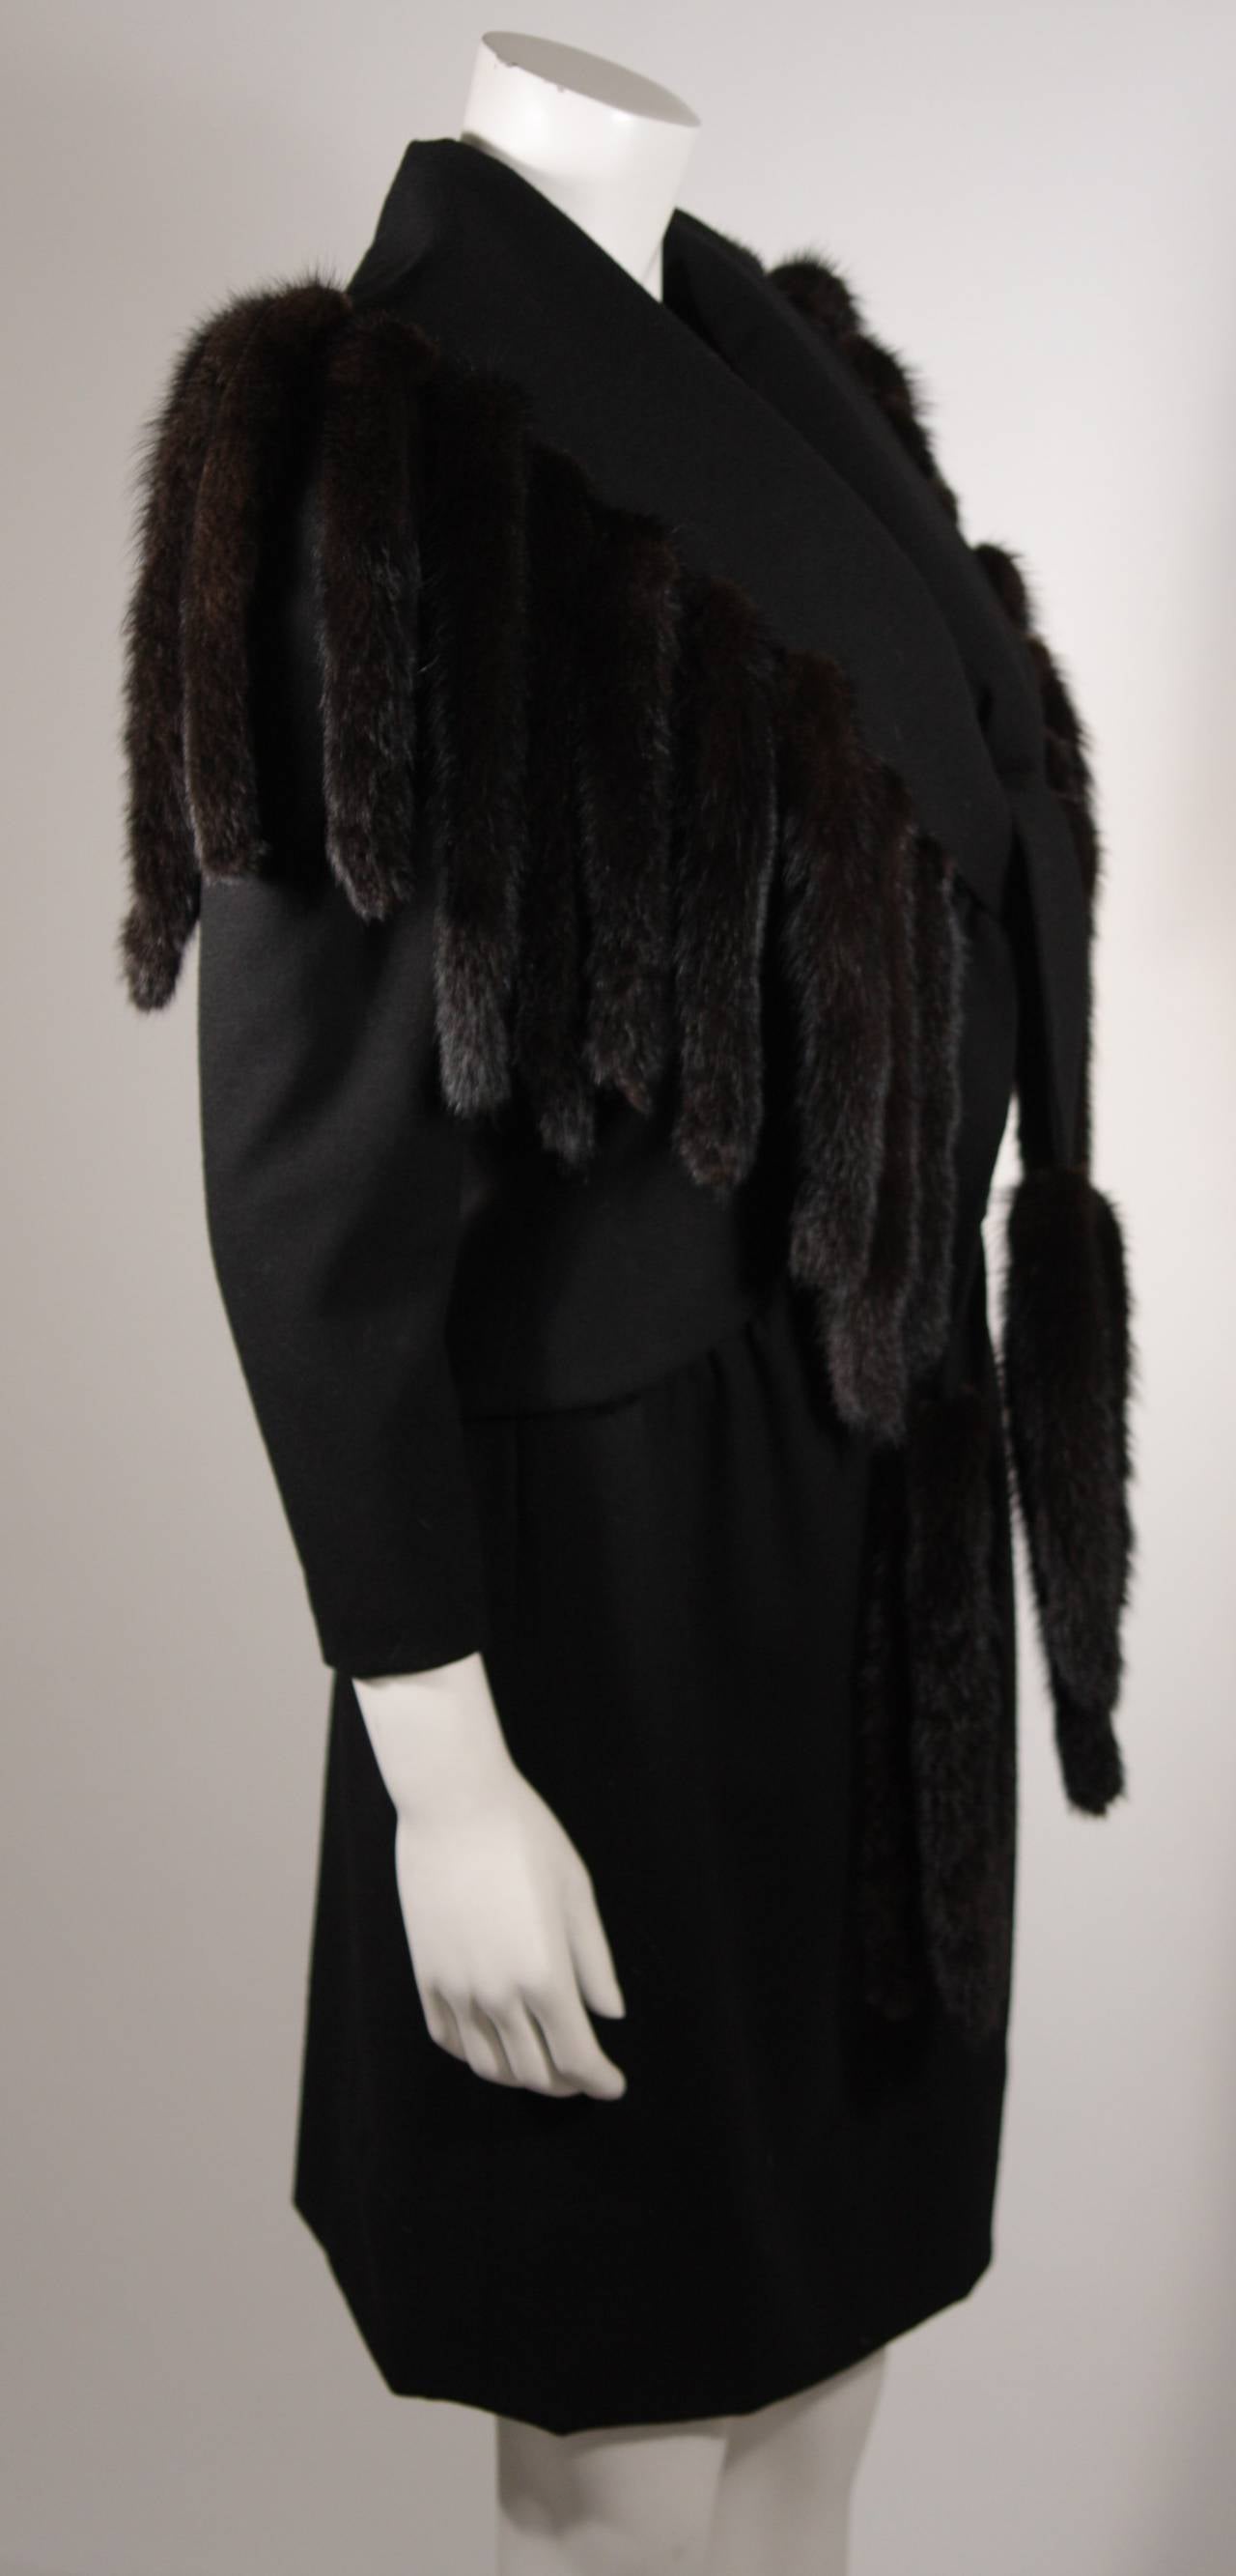 Travilla Black Wool Dress Ensemble with Mink Tail Fringed Coat Size 6-8 For Sale 1